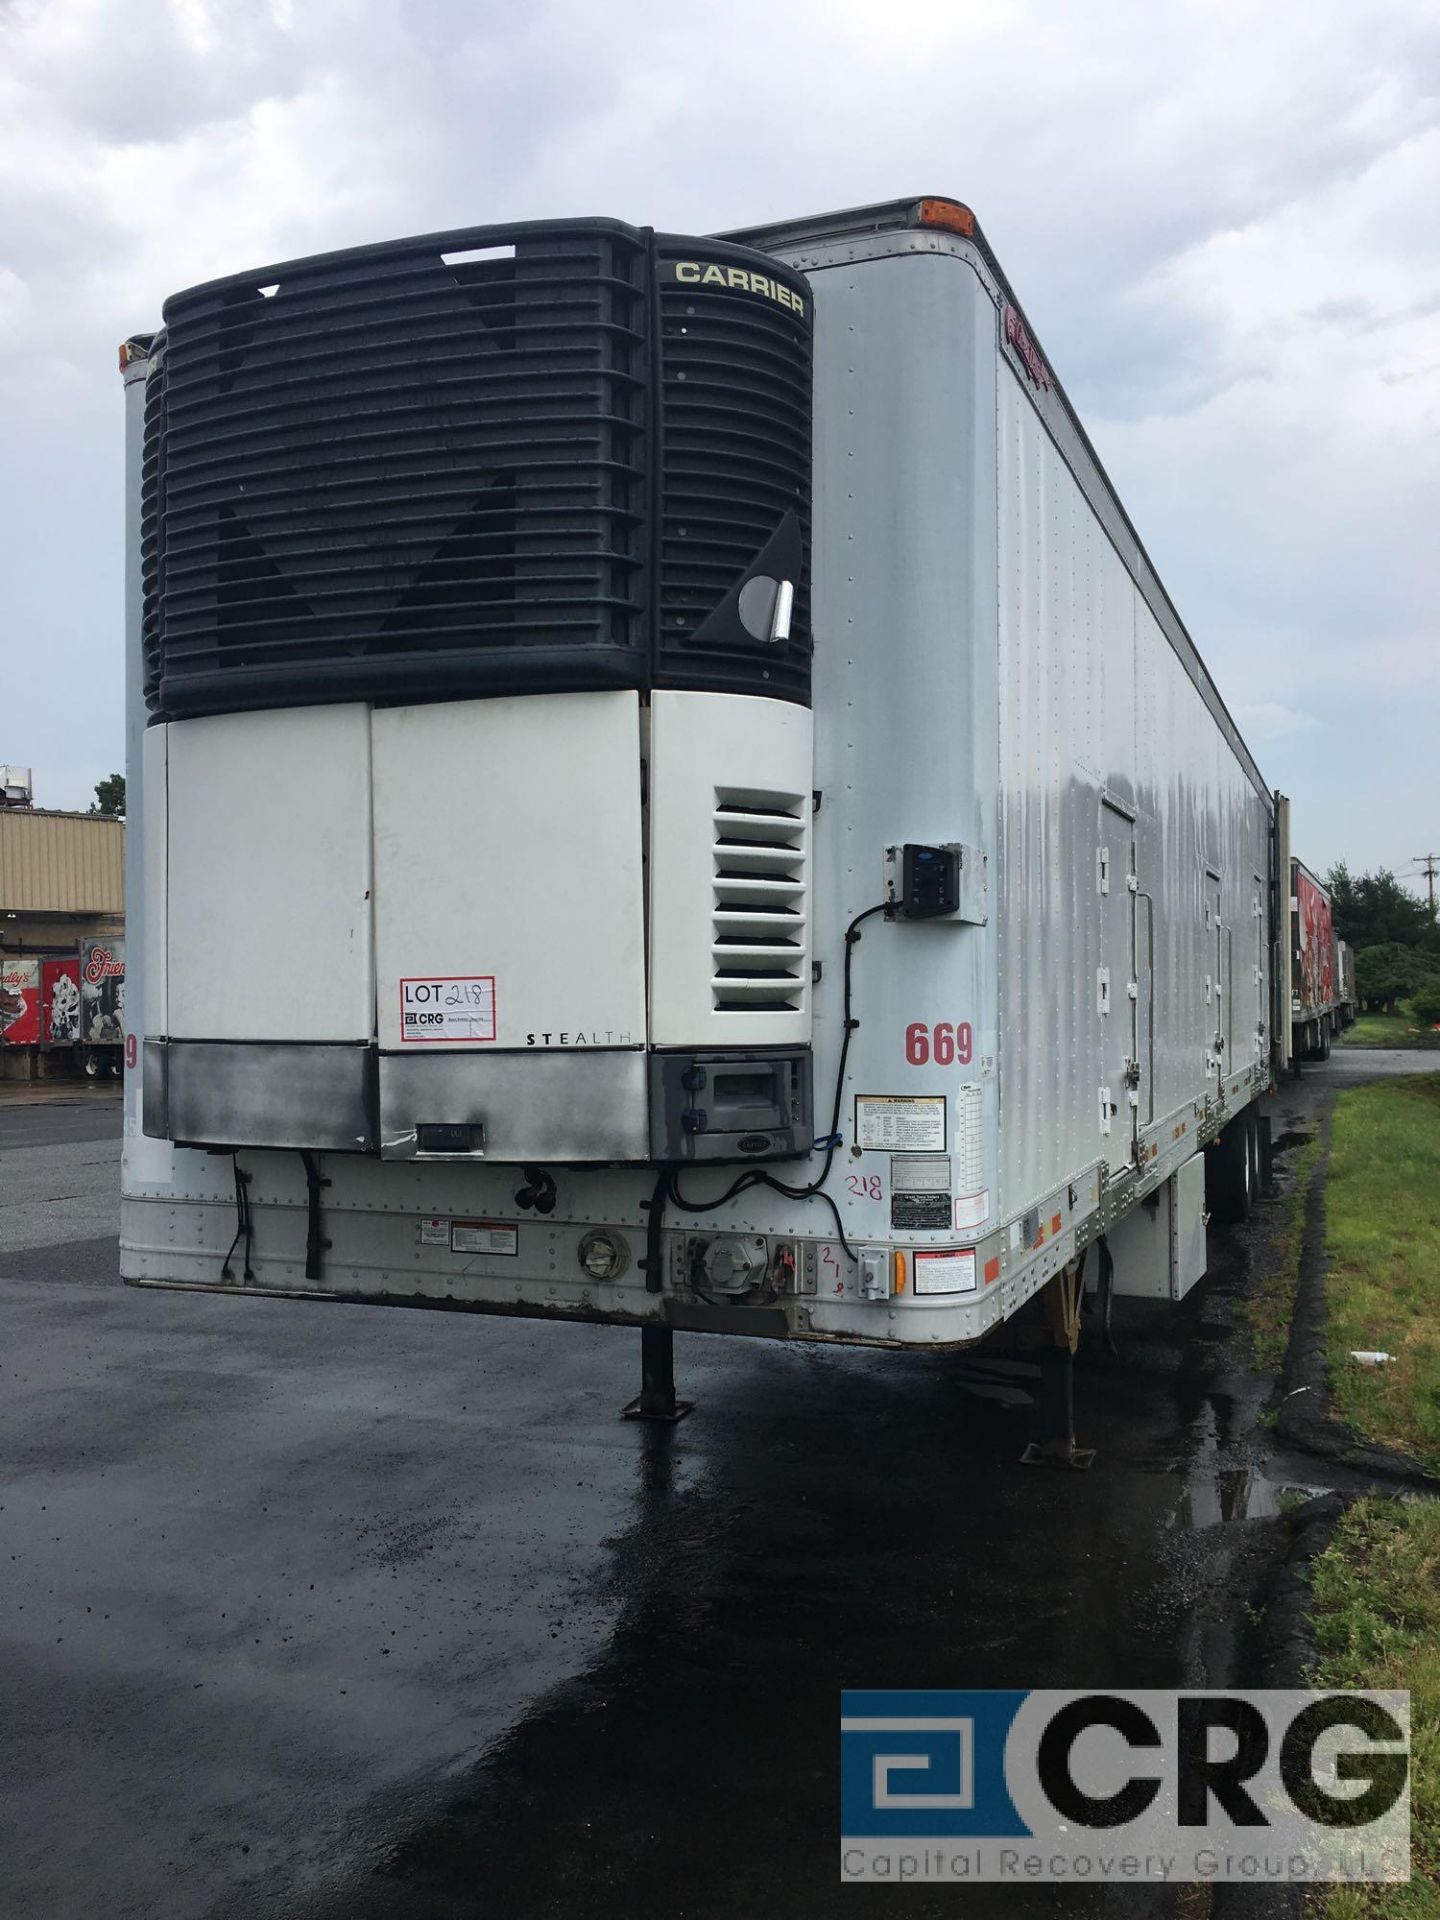 2003 Great Dane Multi Temp Refrigerated Semi Trailer - 45 Long, 102" wide, Carrier T1000, n/s - Image 2 of 7